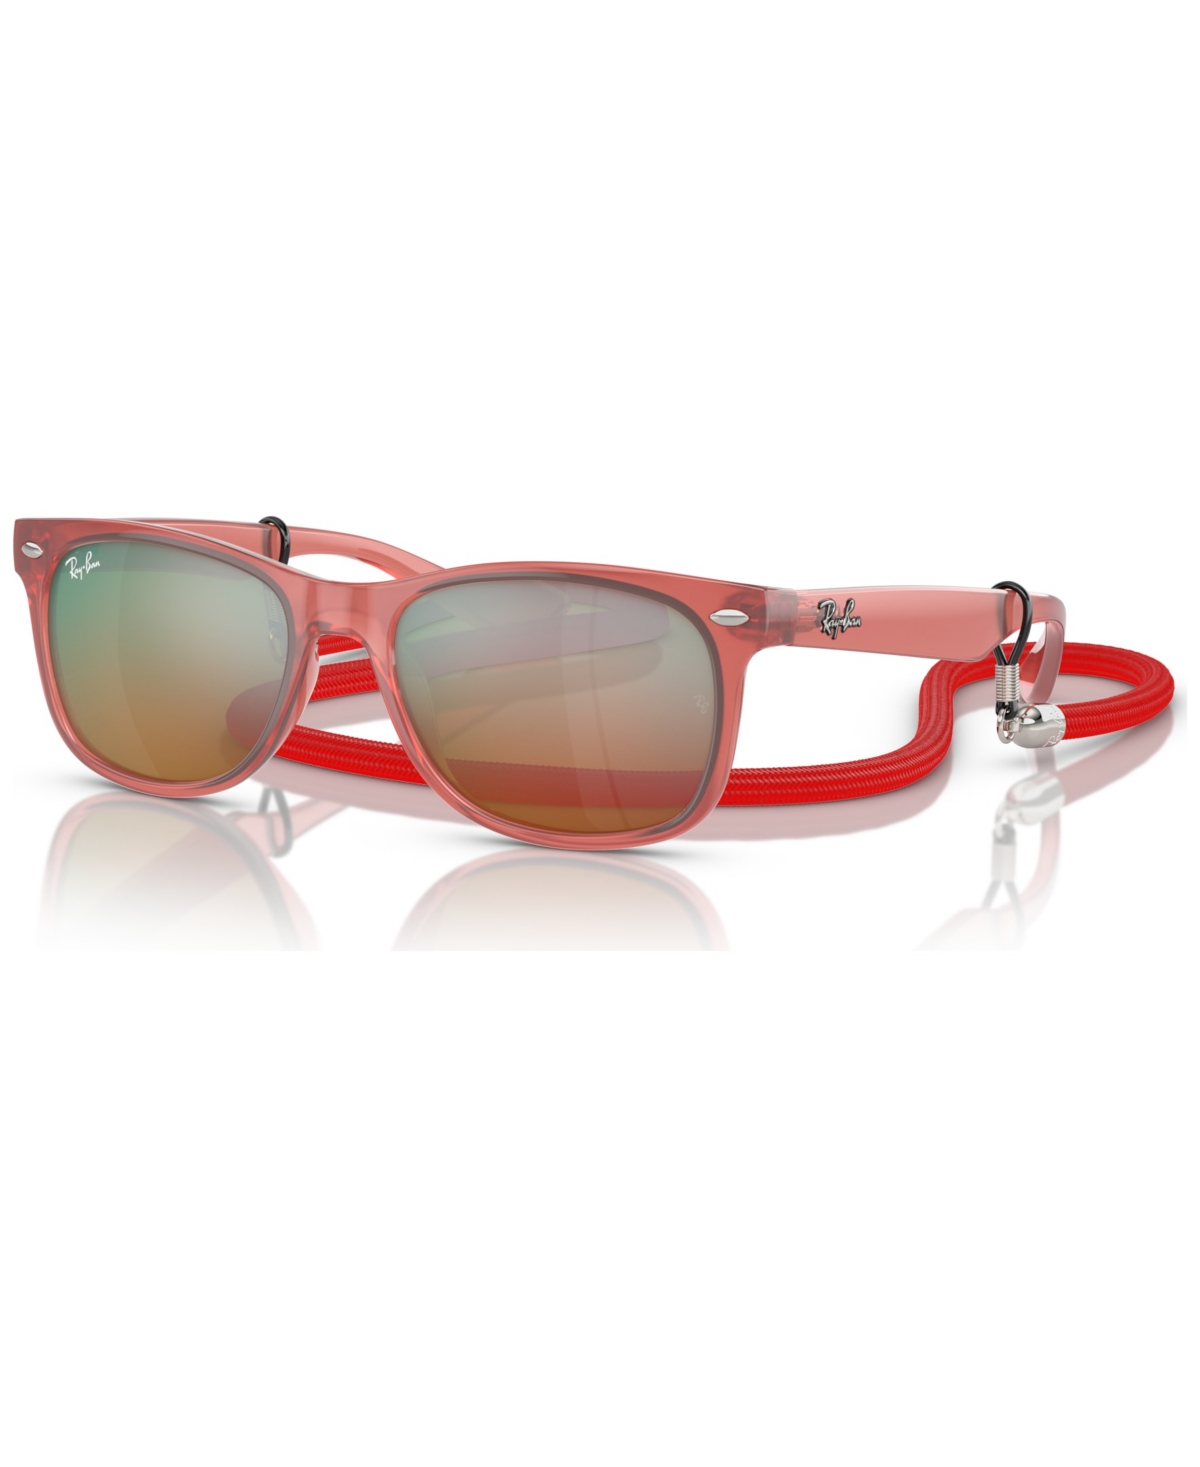 Ray-ban Jr Kids Sunglasses, New Wayfarer (ages 7-10) In Opal Red